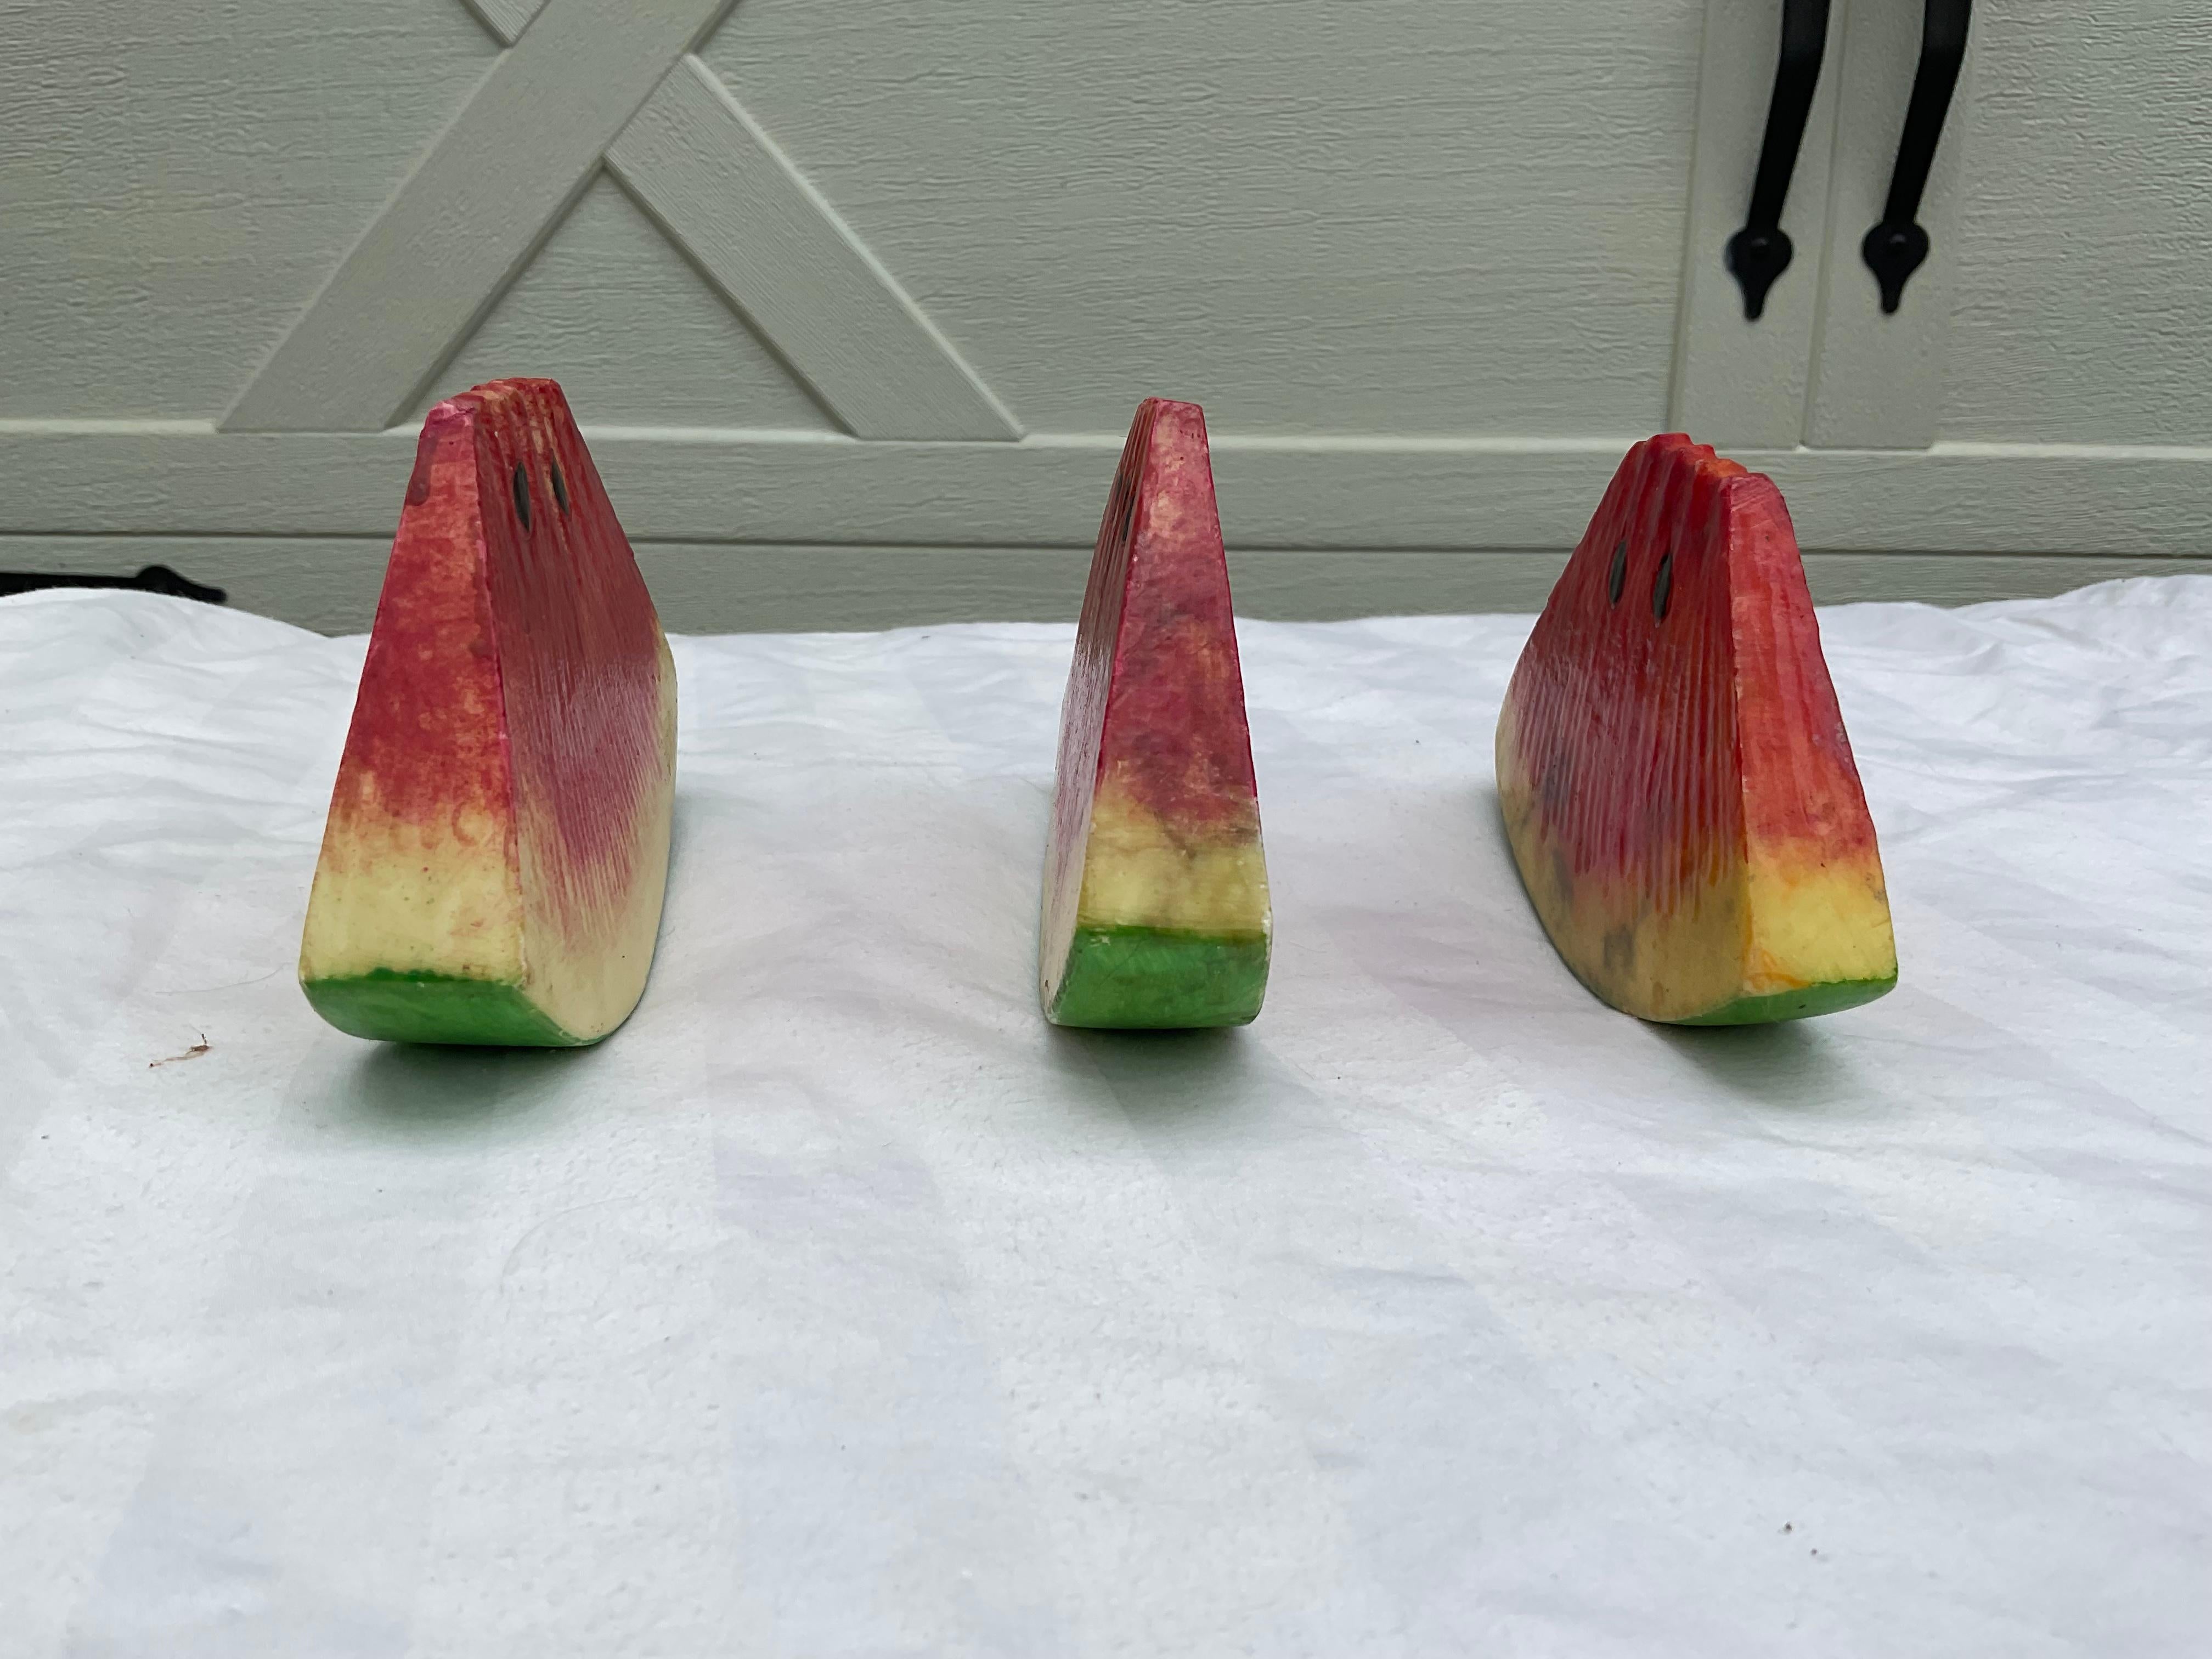 I love all Italian stone fruit! At this point in time, I only buy “ hard to find” pieces of it. This collection of 3 watermelon slices fits this category. They are very realistic, in appearance. All hand painted, made of Italian alabaster. 2 of the